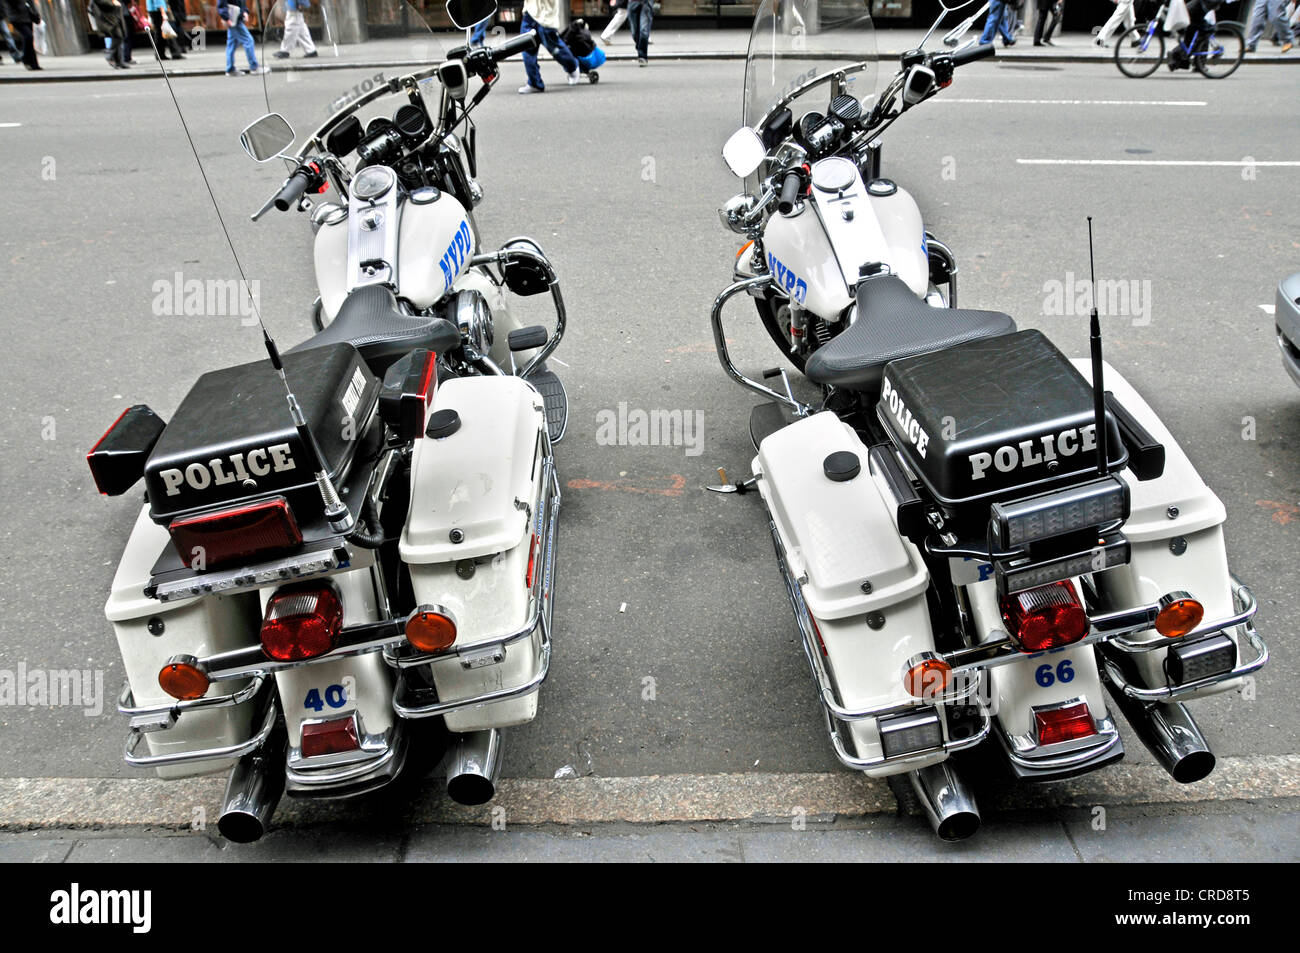 two police motor bicycles of the NYPD by Harley Davidson, USA, New York City, Manhattan Stock Photo